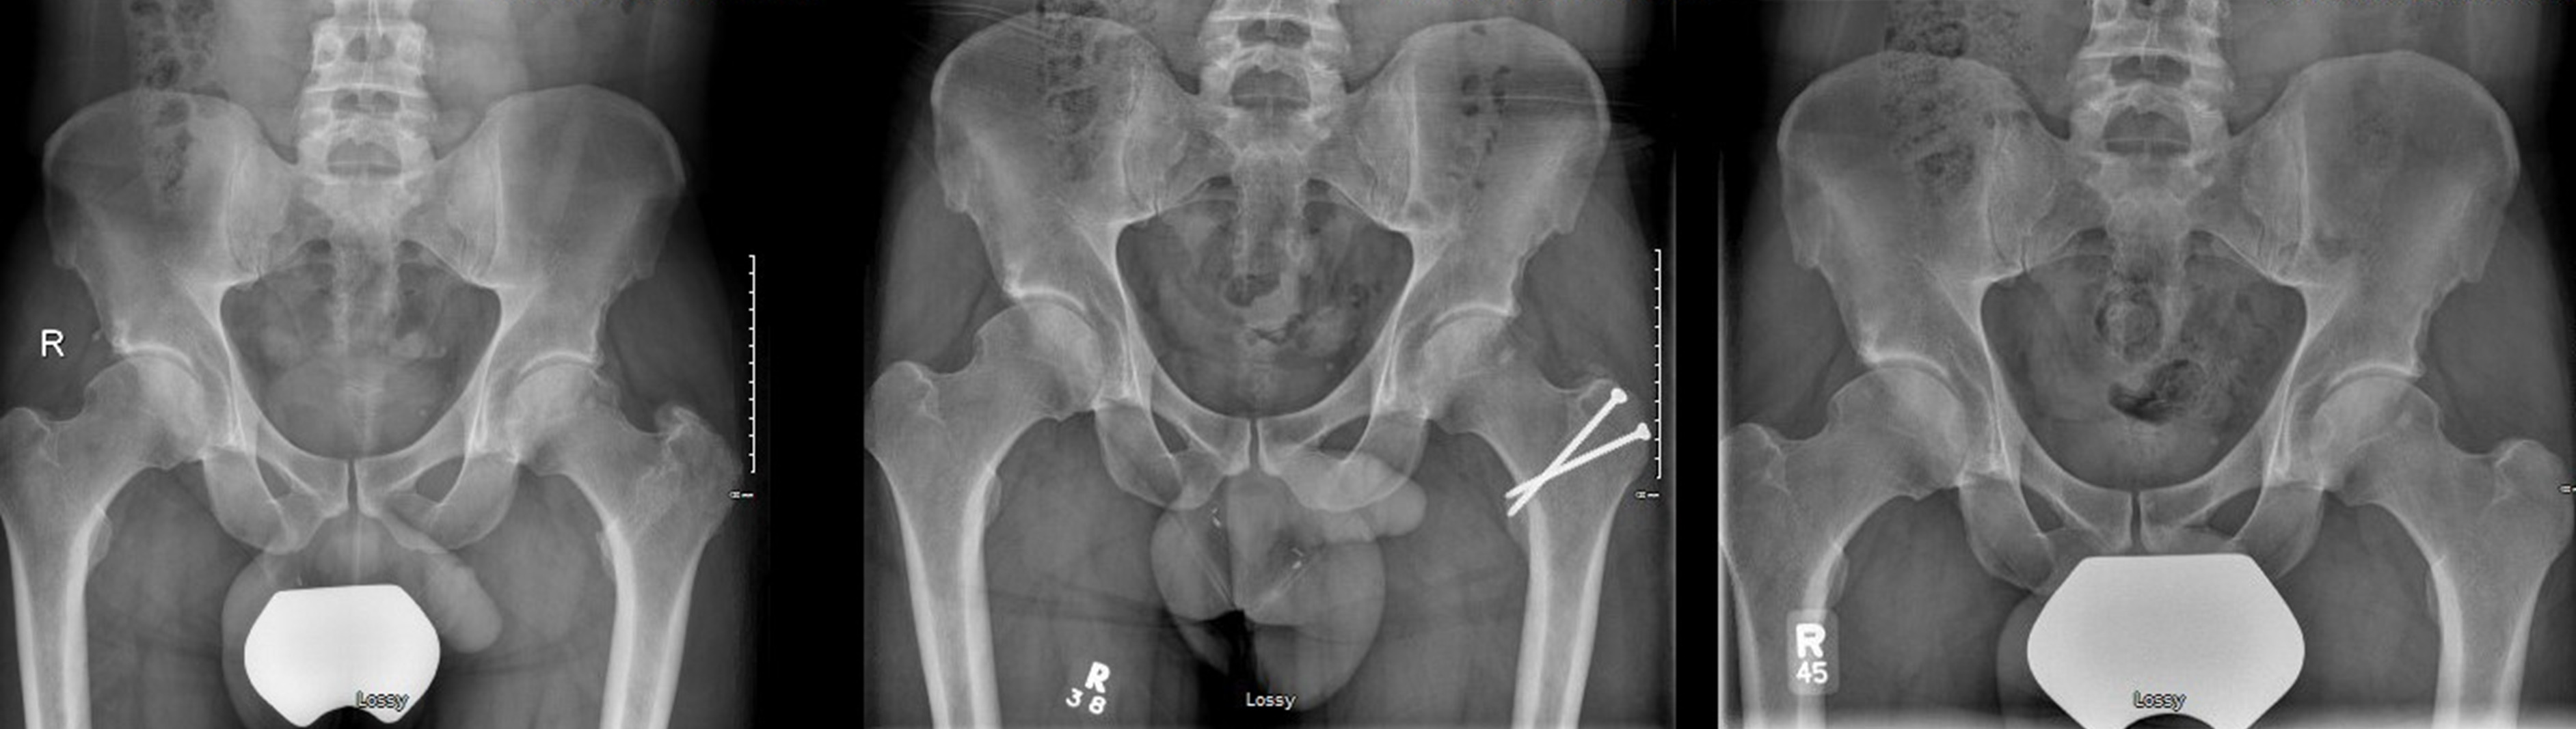 Fig. 1 
            Preoperative, immediate postoperative, and ten-year follow-up anteroposterior radiograph of a patient who underwent open surgical dislocation, labral repair, and femoral osteochondroplasty for the treatment of cam type femoroacetabular impingement.
          